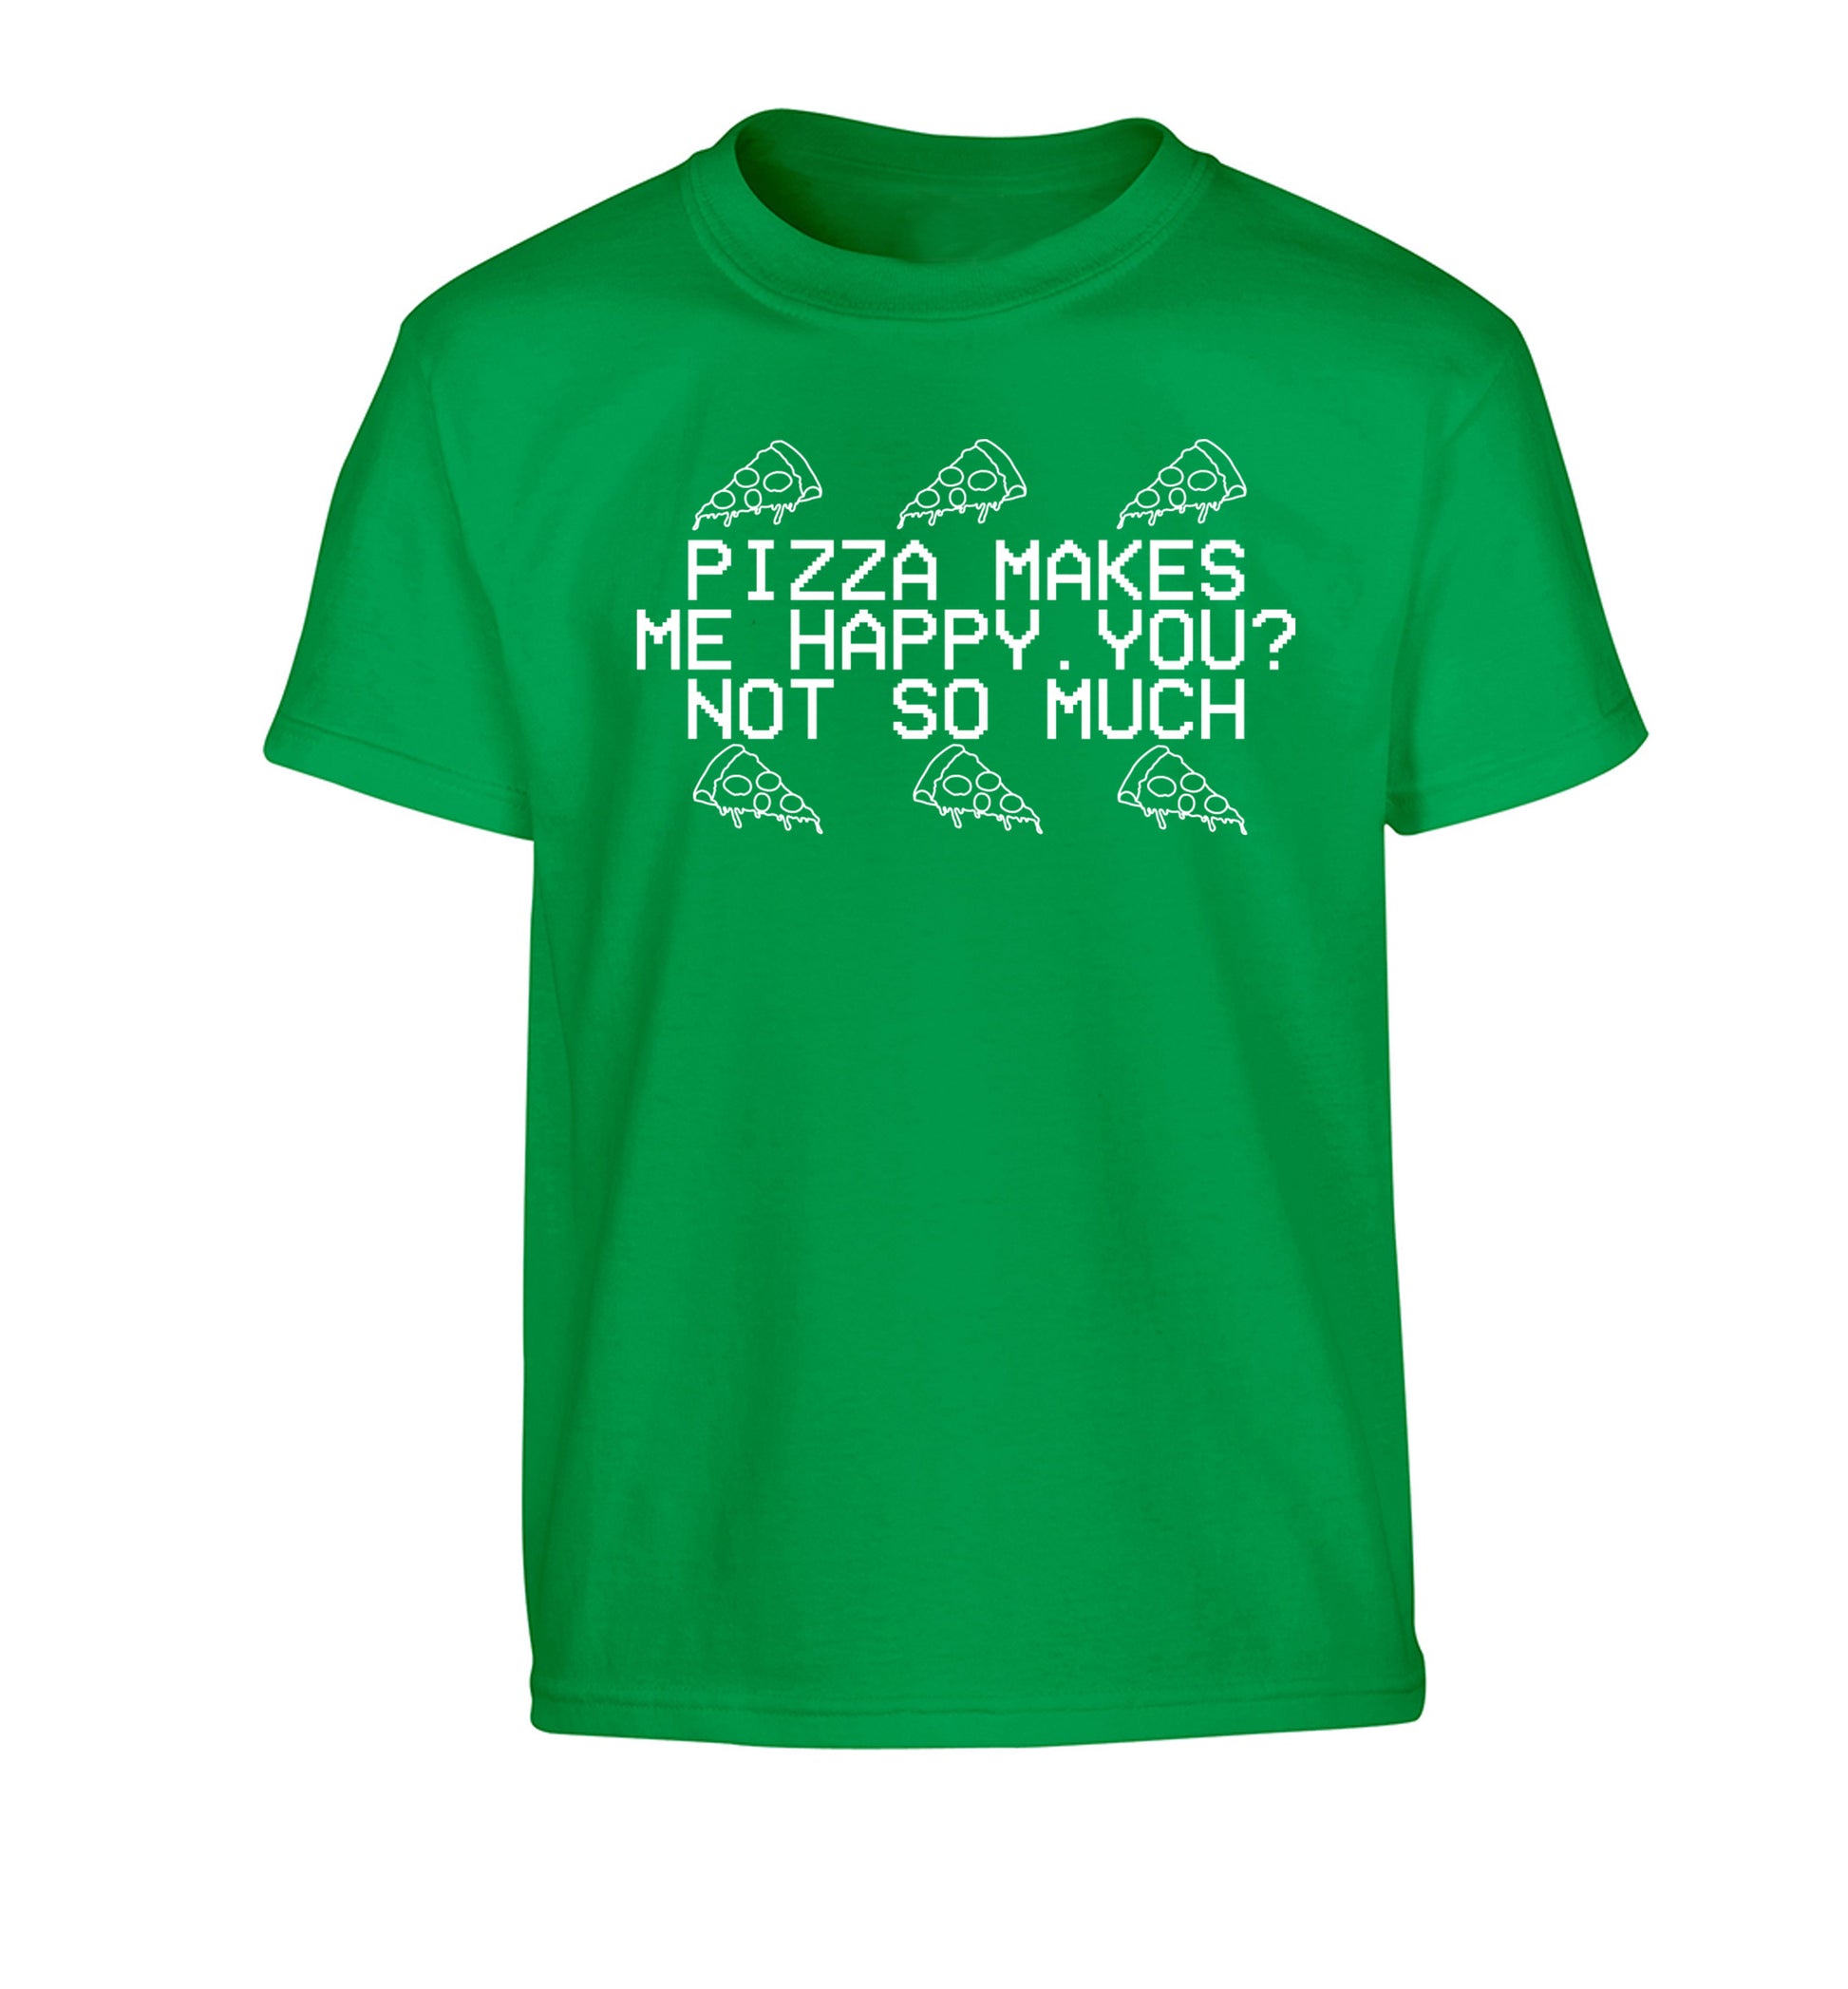 Pizza makes me happy, You? Not so much Children's green Tshirt 12-14 Years